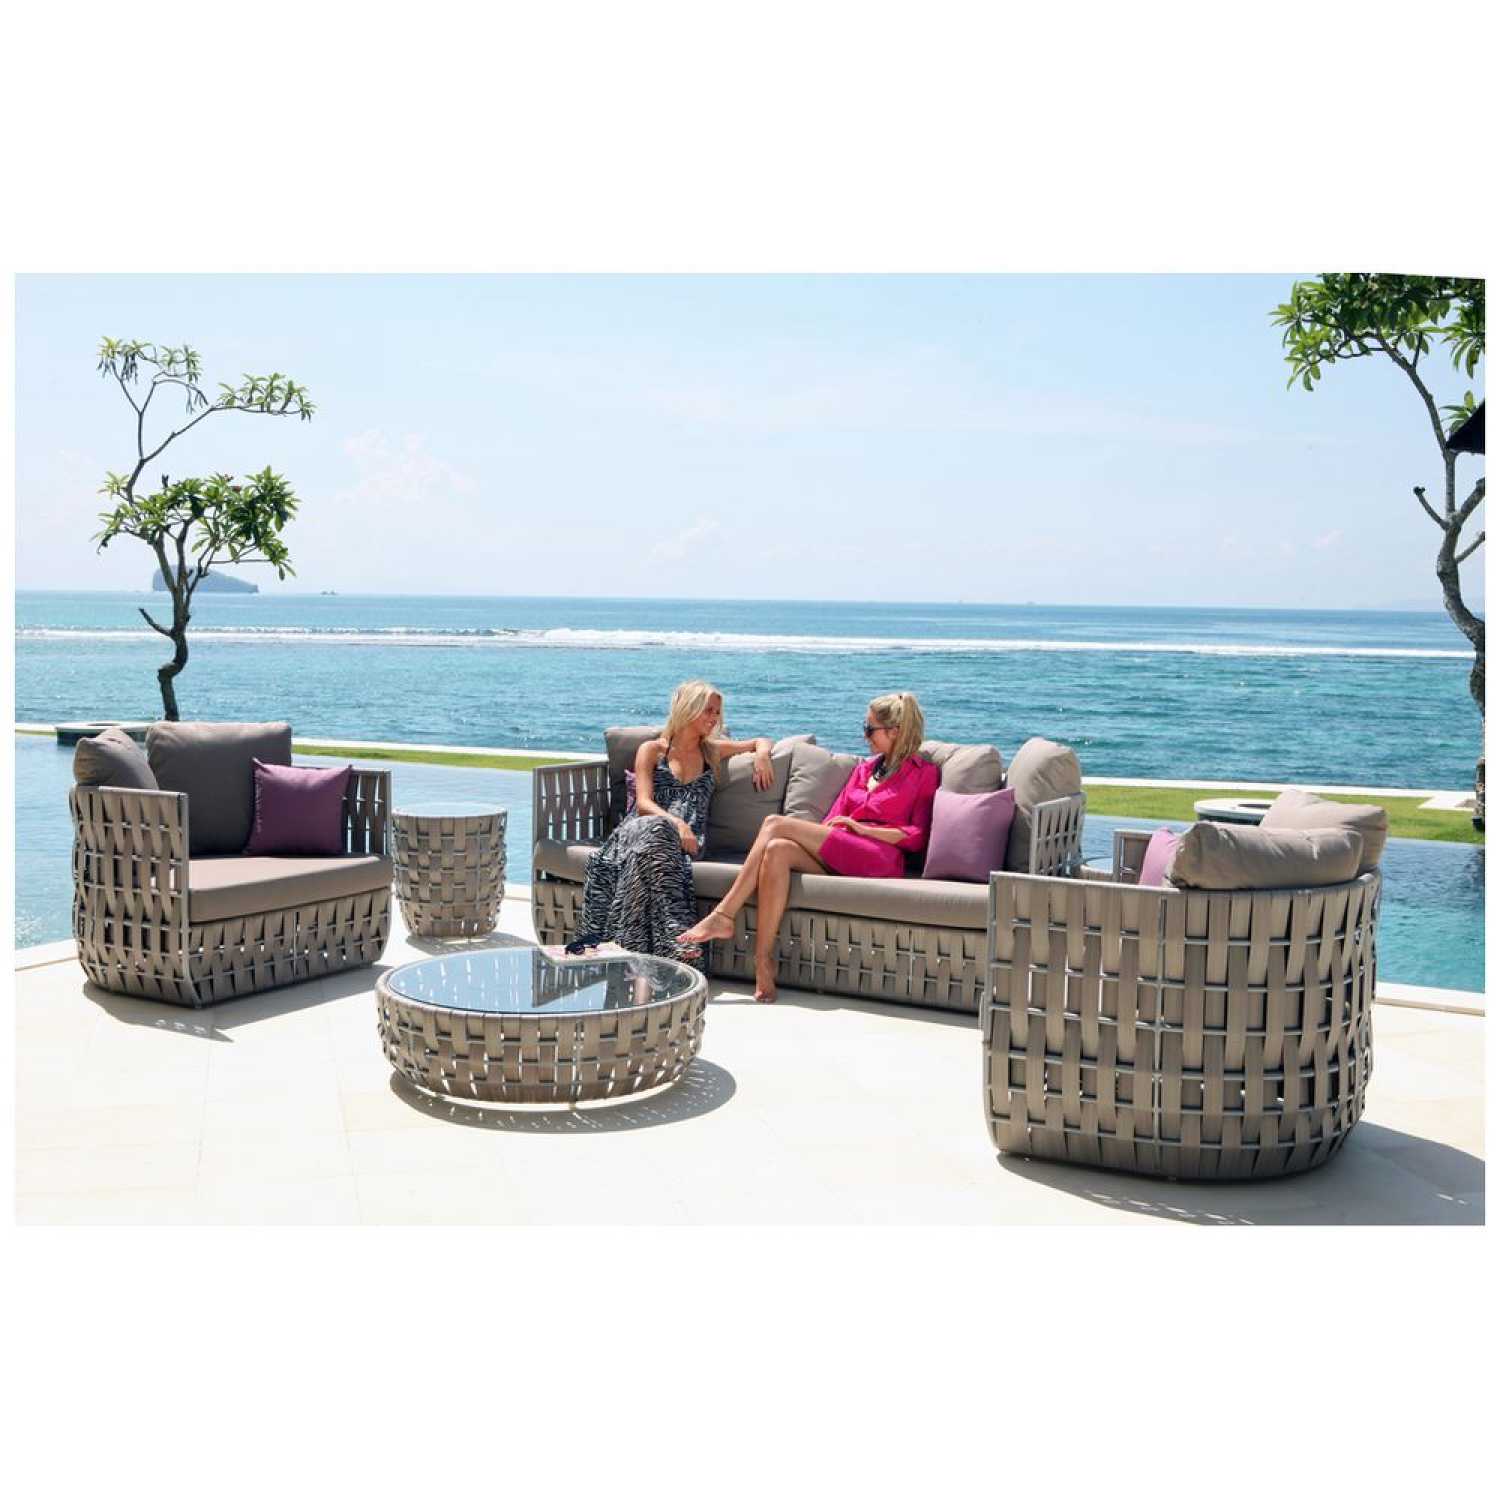 Strips Silver Walnut Arm Chair - PadioLiving - Strips Silver Walnut Arm Chair - Outdoor Arm Chair - PadioLiving